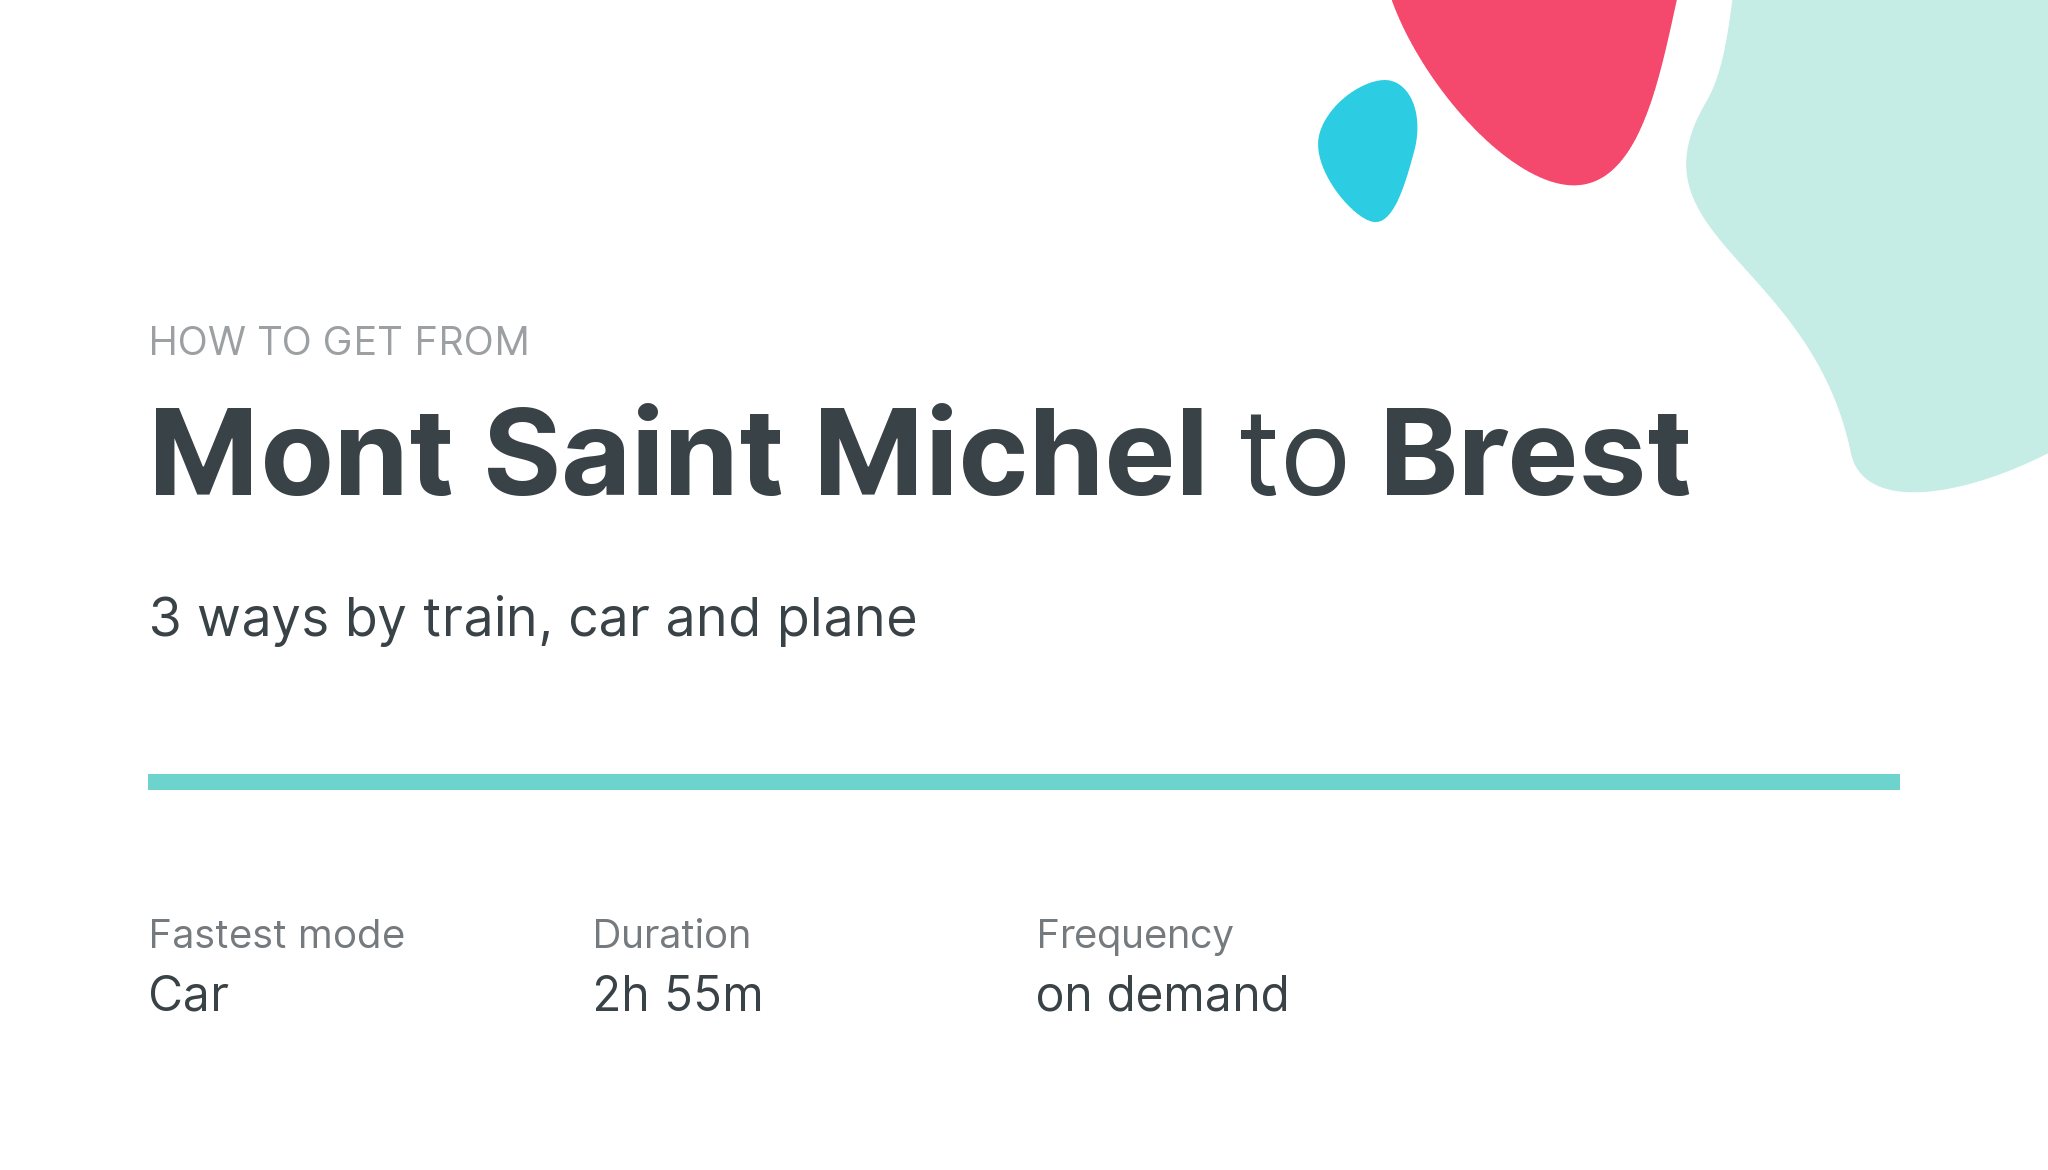 How do I get from Mont Saint Michel to Brest